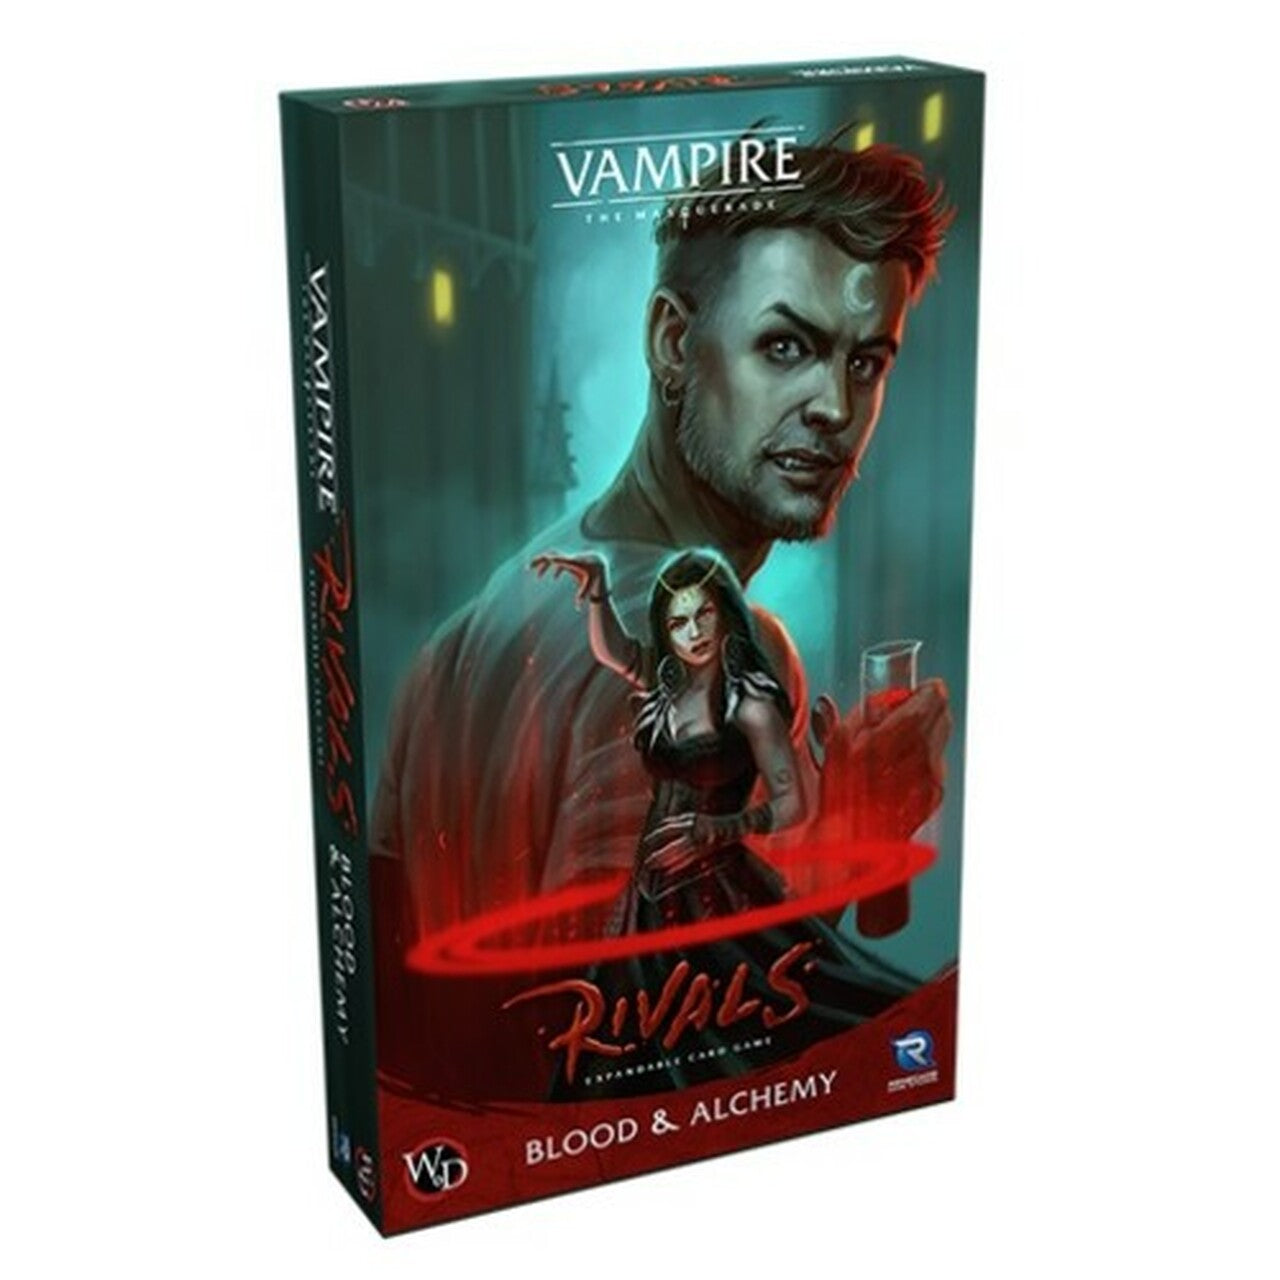 Vampire Rivals: Blood & Alchemy Expansion